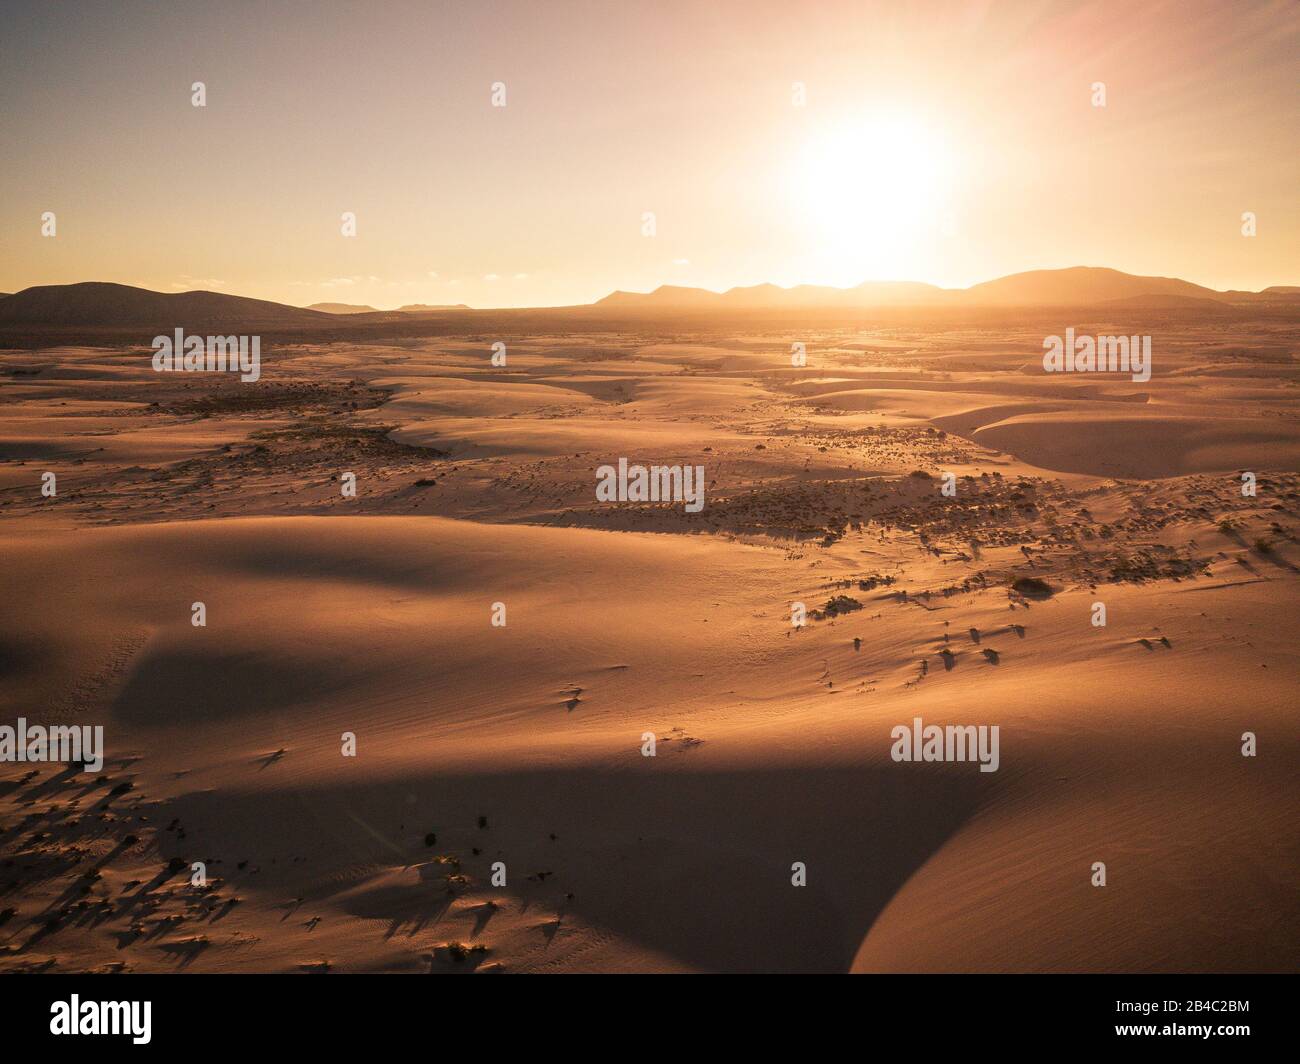 Beautiful desert and dunes view from above with sun and shadows on the sand - amazing nature outdoors and concept of beauty of the world and wild places to visit and enjoy - Stock Photo